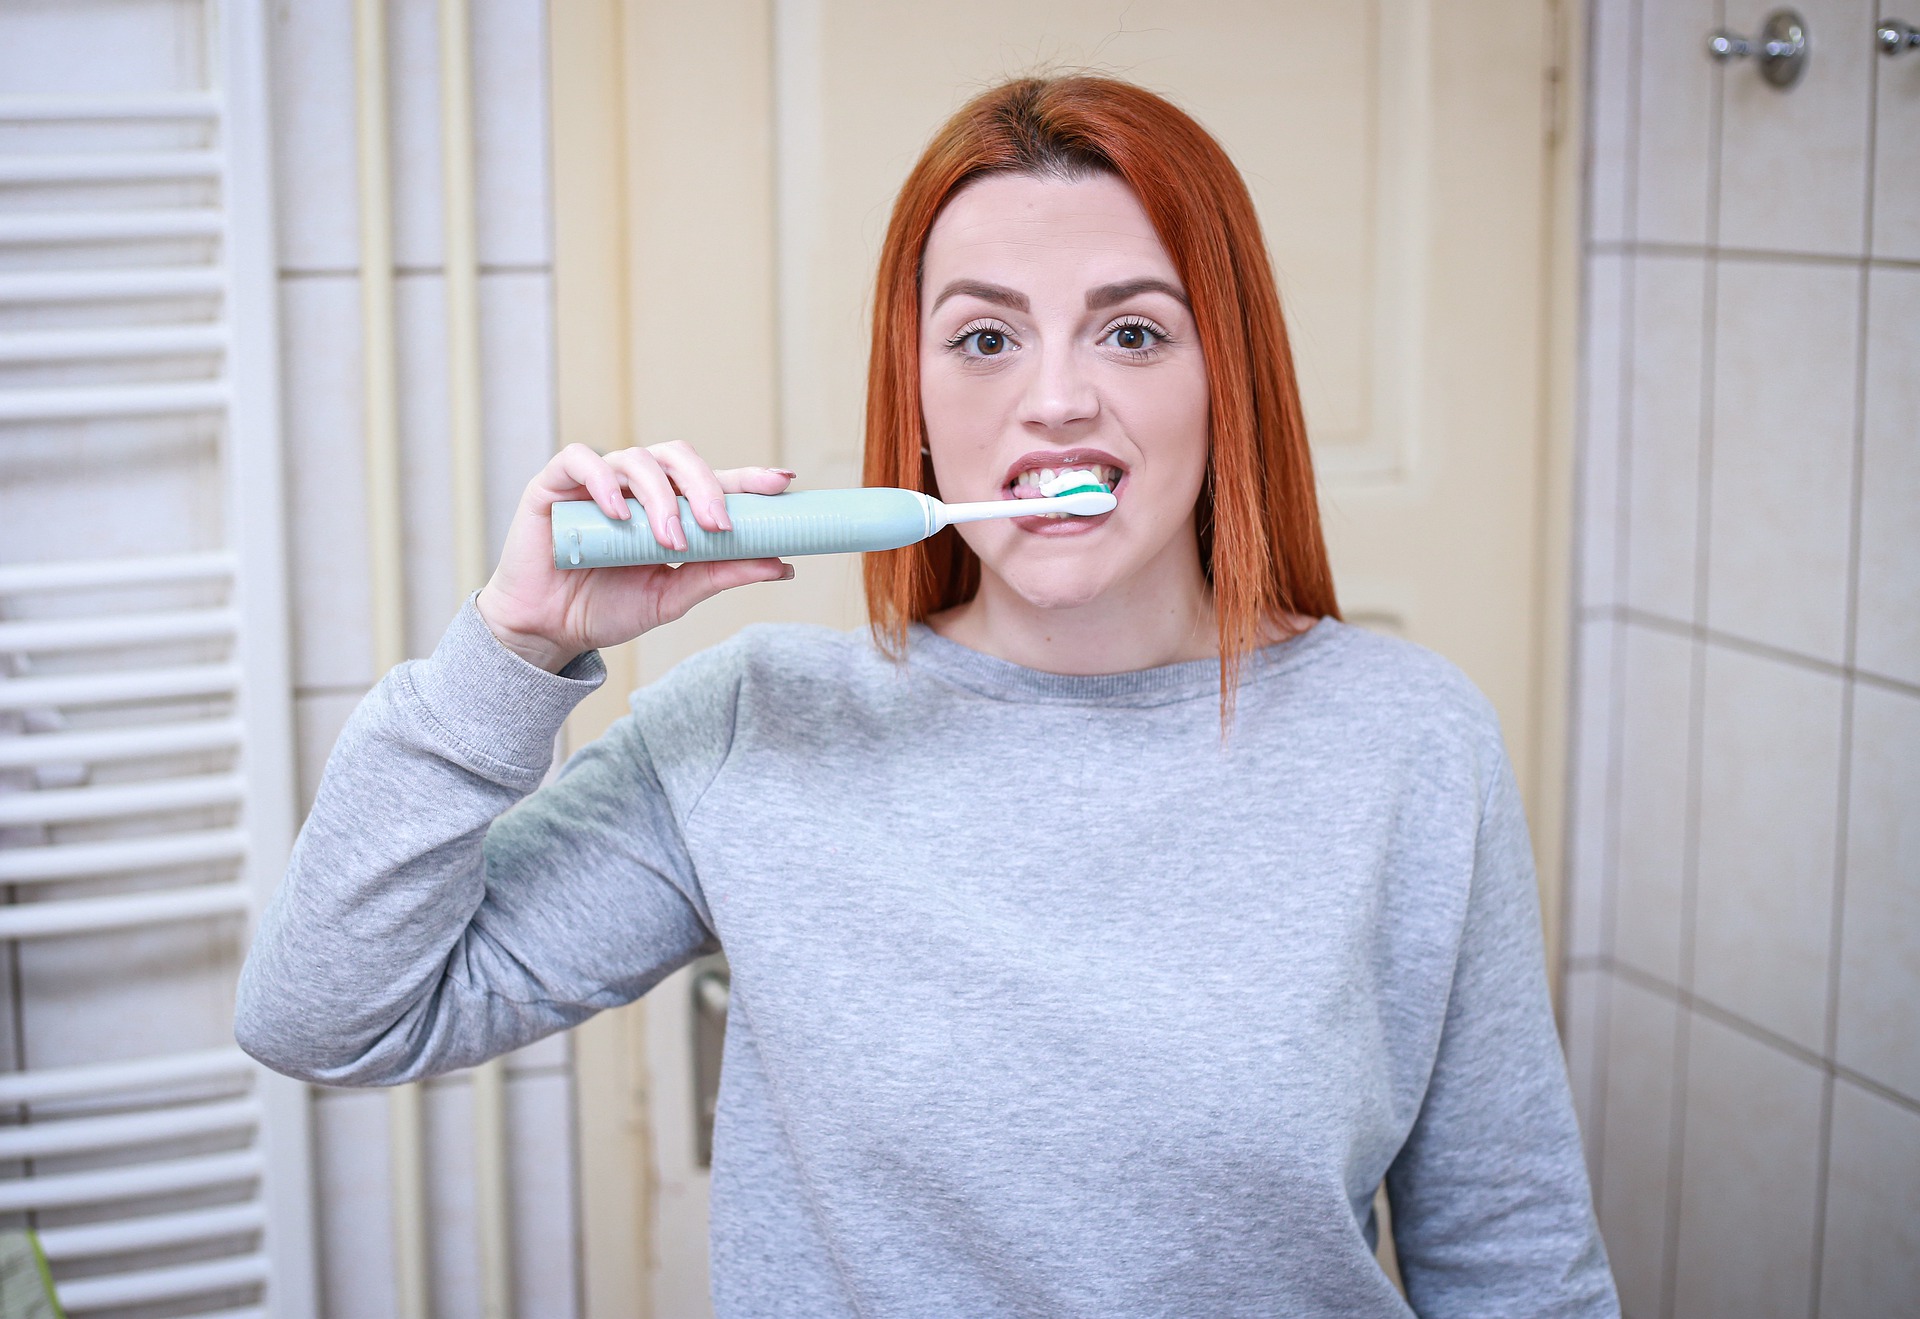 Electric toothbrush – how they work and which are worth buying?